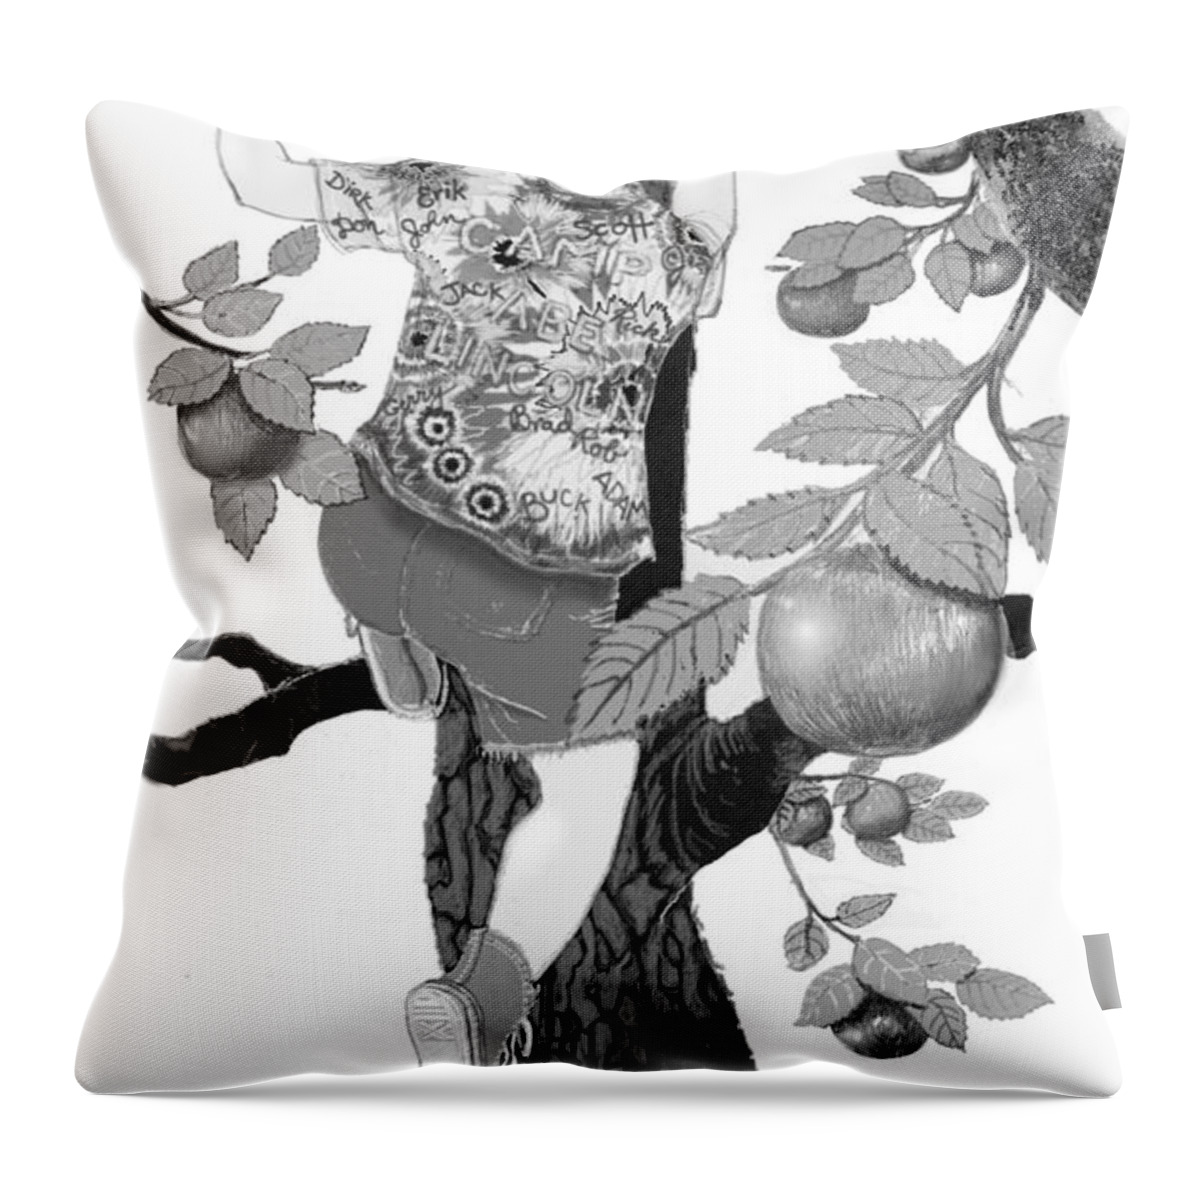 Boy Throw Pillow featuring the digital art Where the Best Apples Are by Carol Jacobs